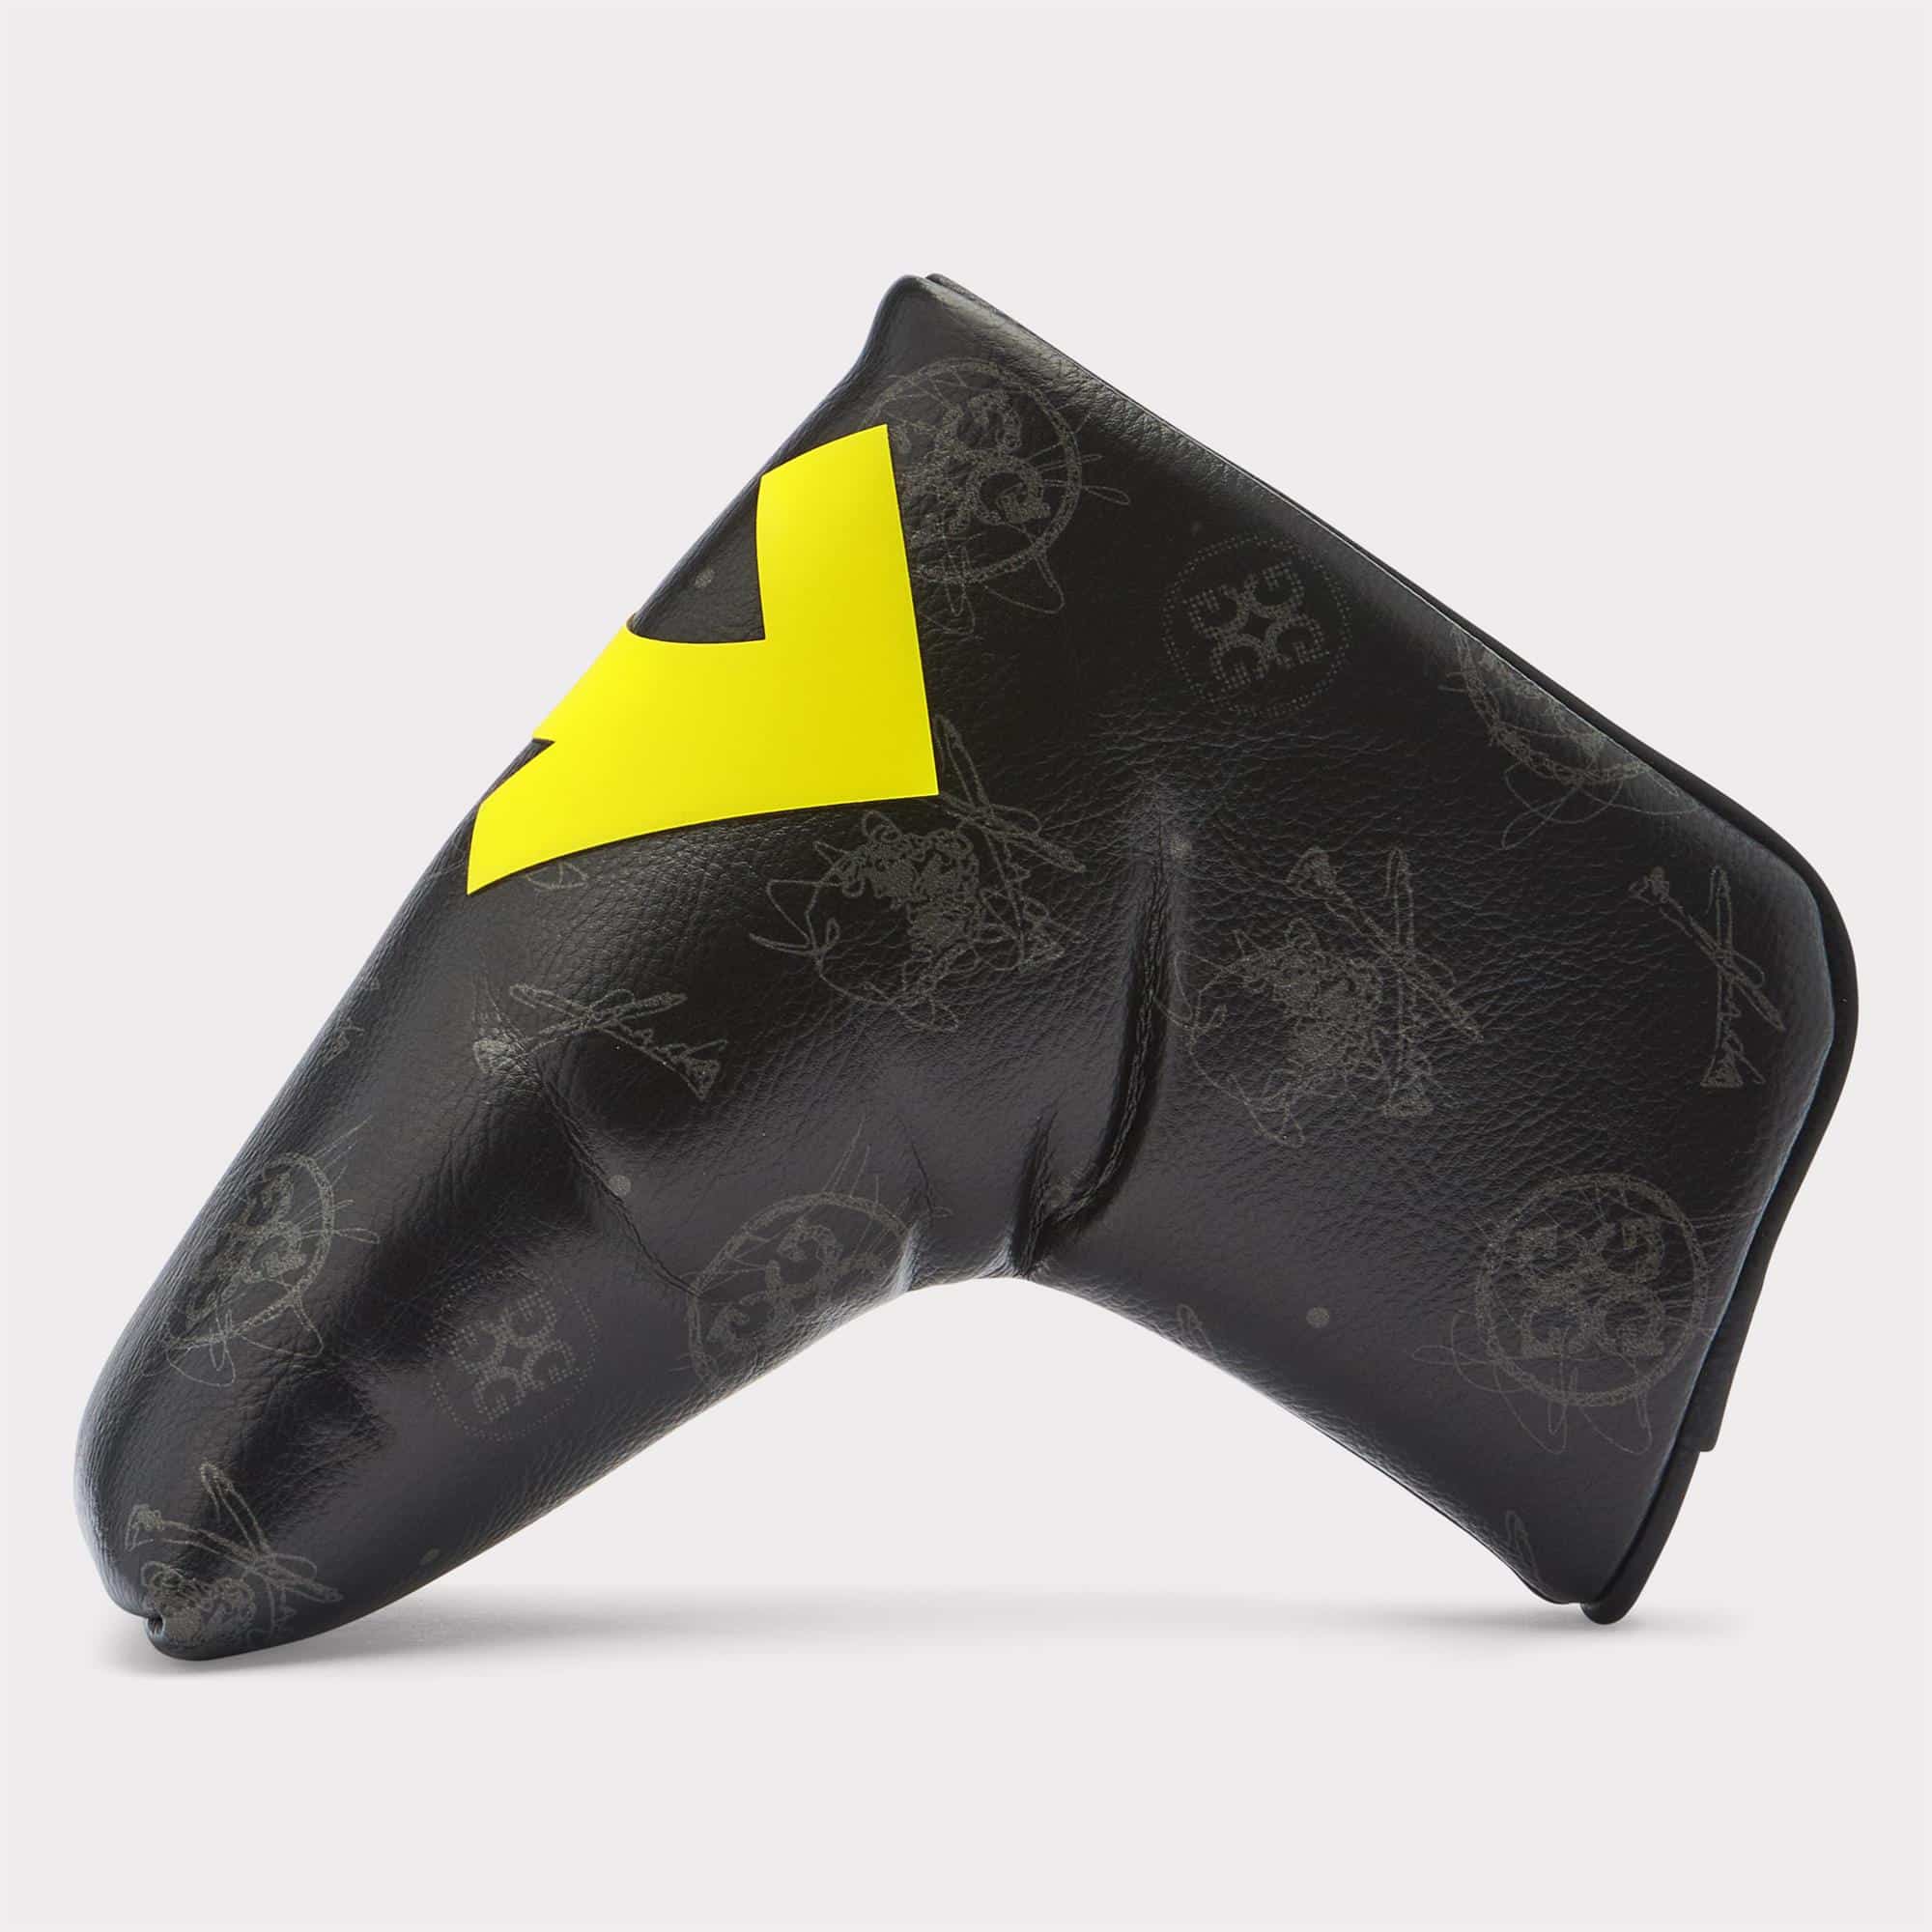 G/FORE Circle G's Blade Putter Cover Cyber